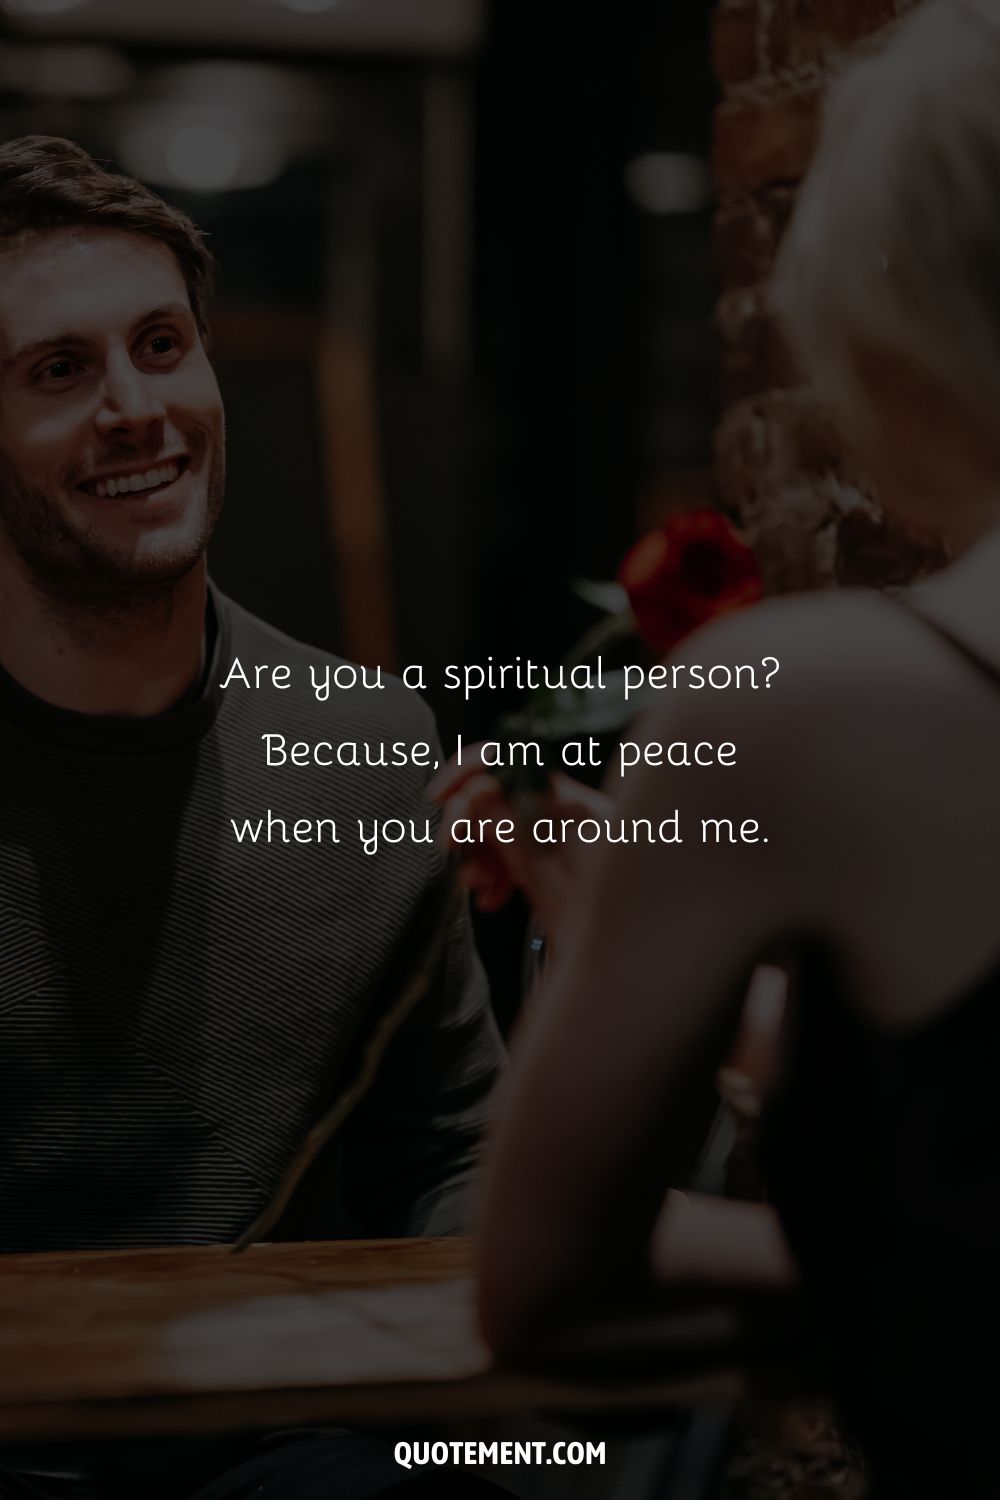 Are you a spiritual person Because, I am at peace when you are around me.